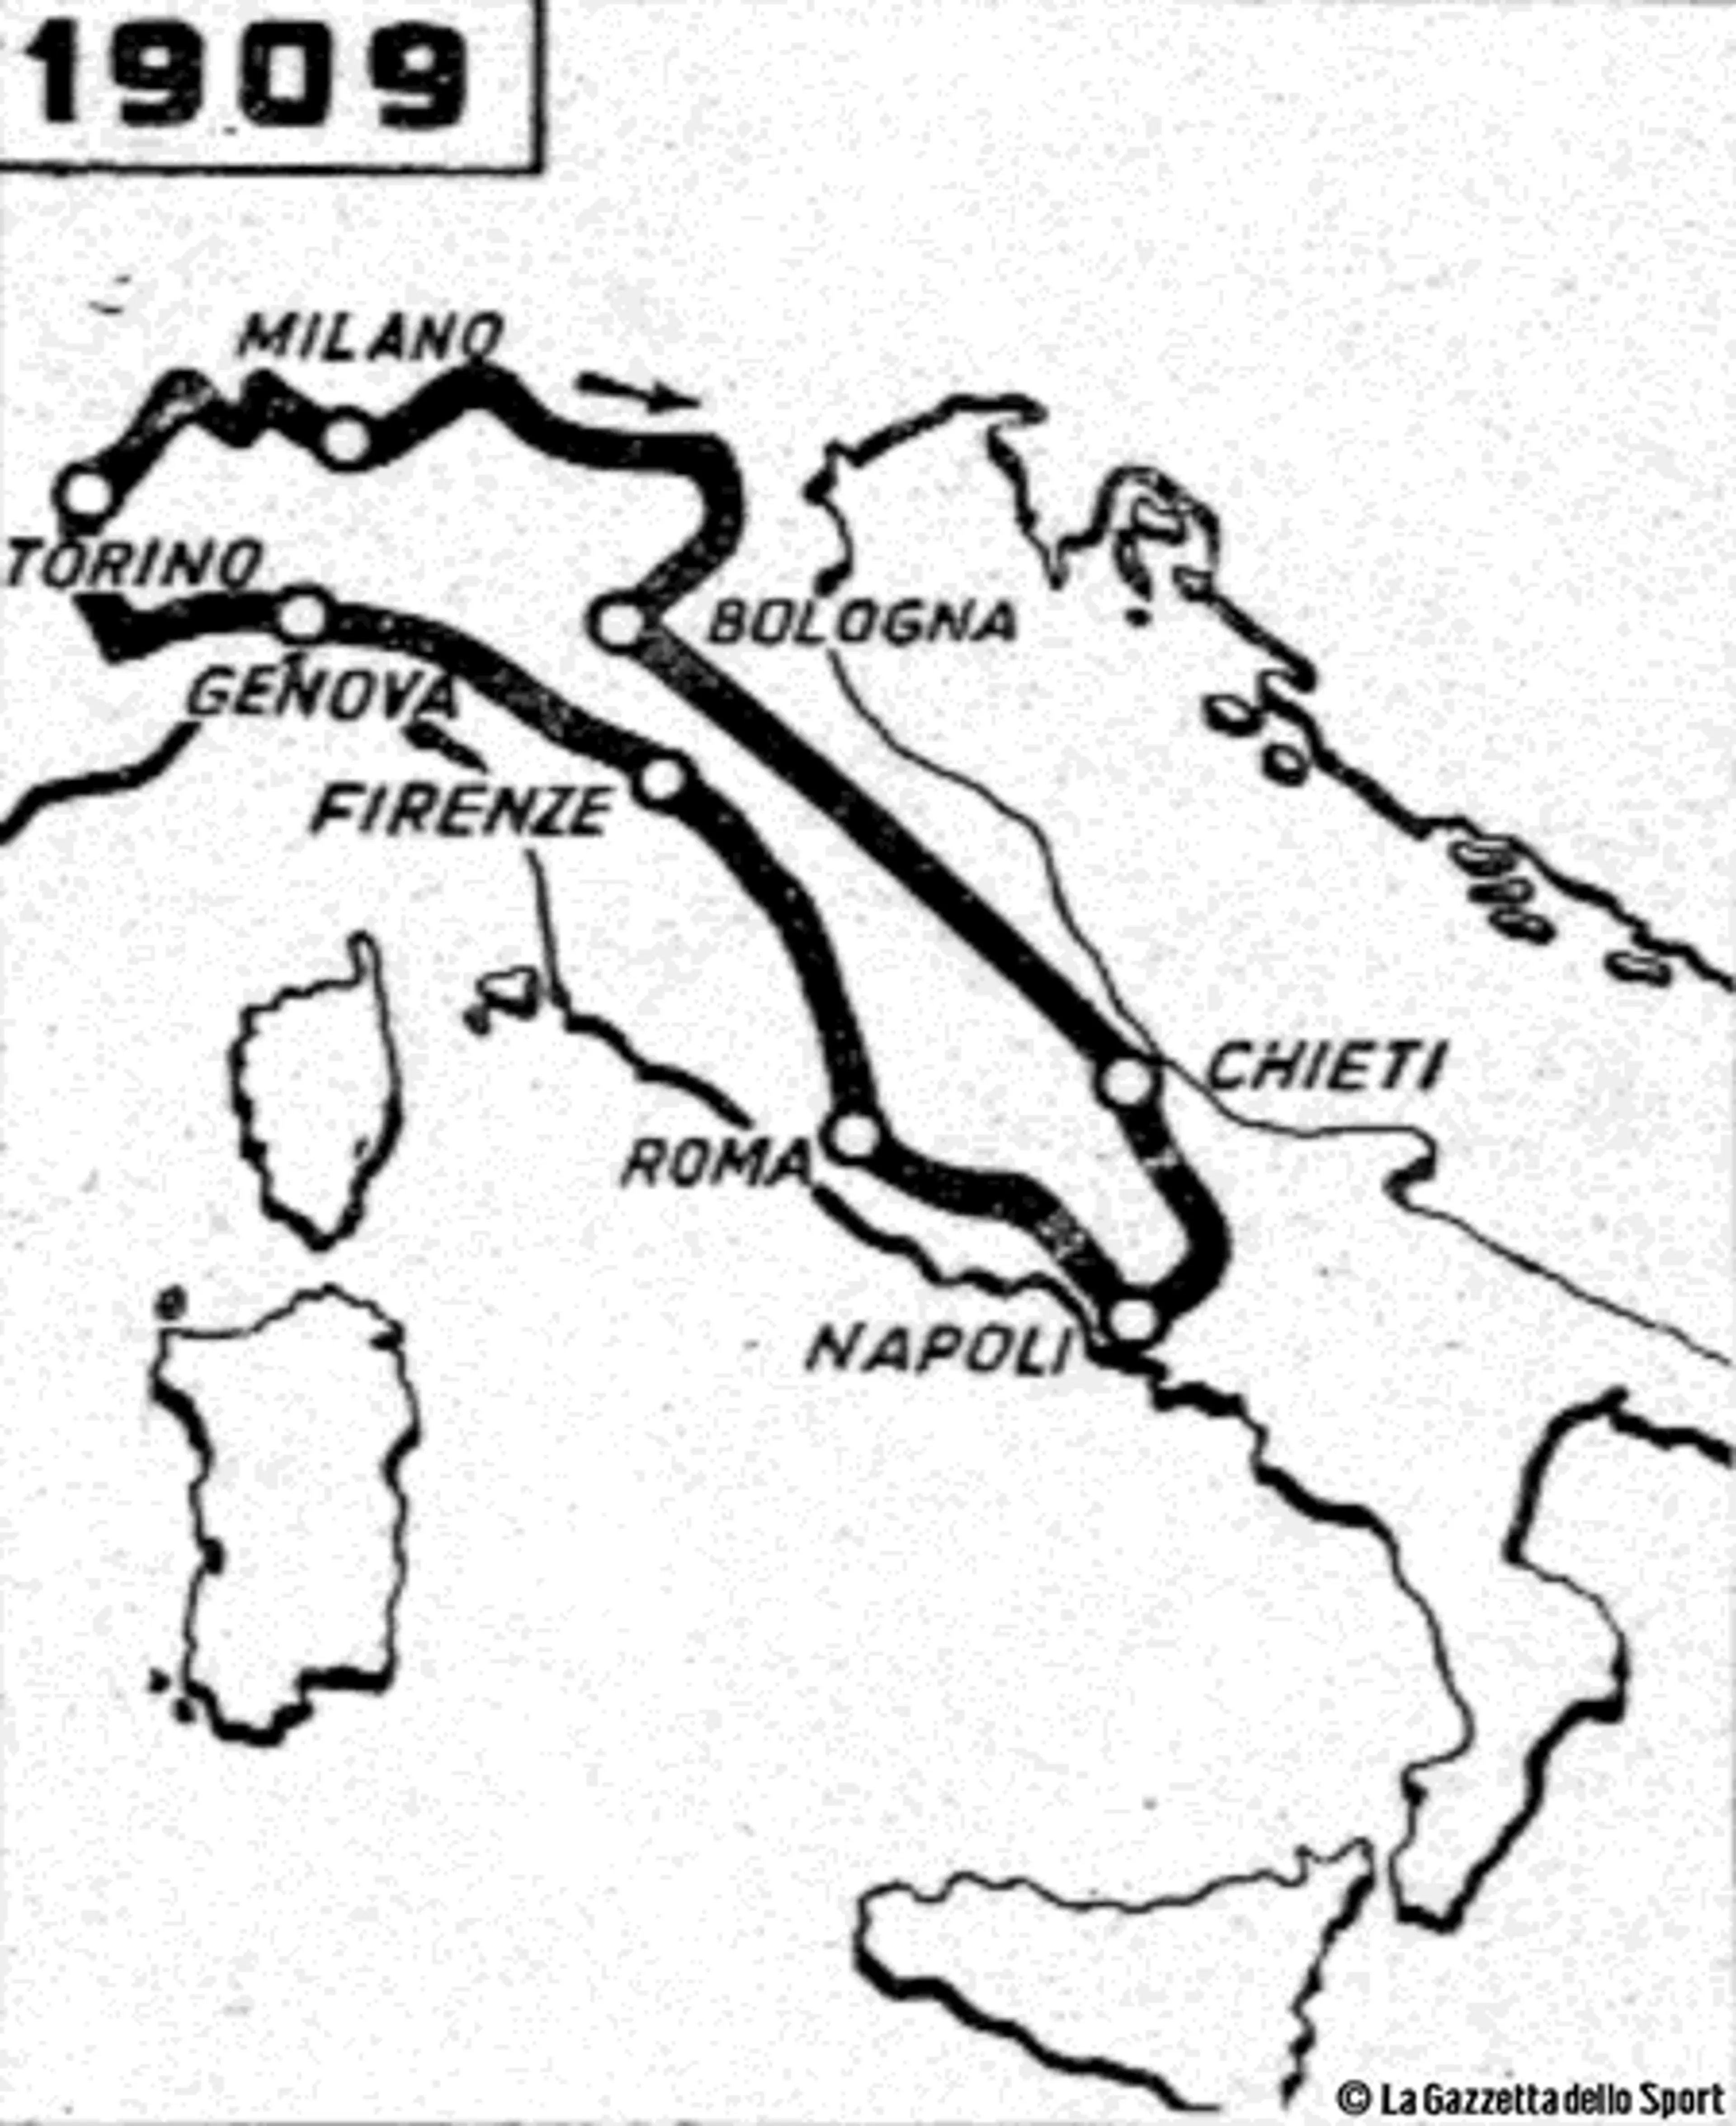 First official route of Giro d'Italia 1909